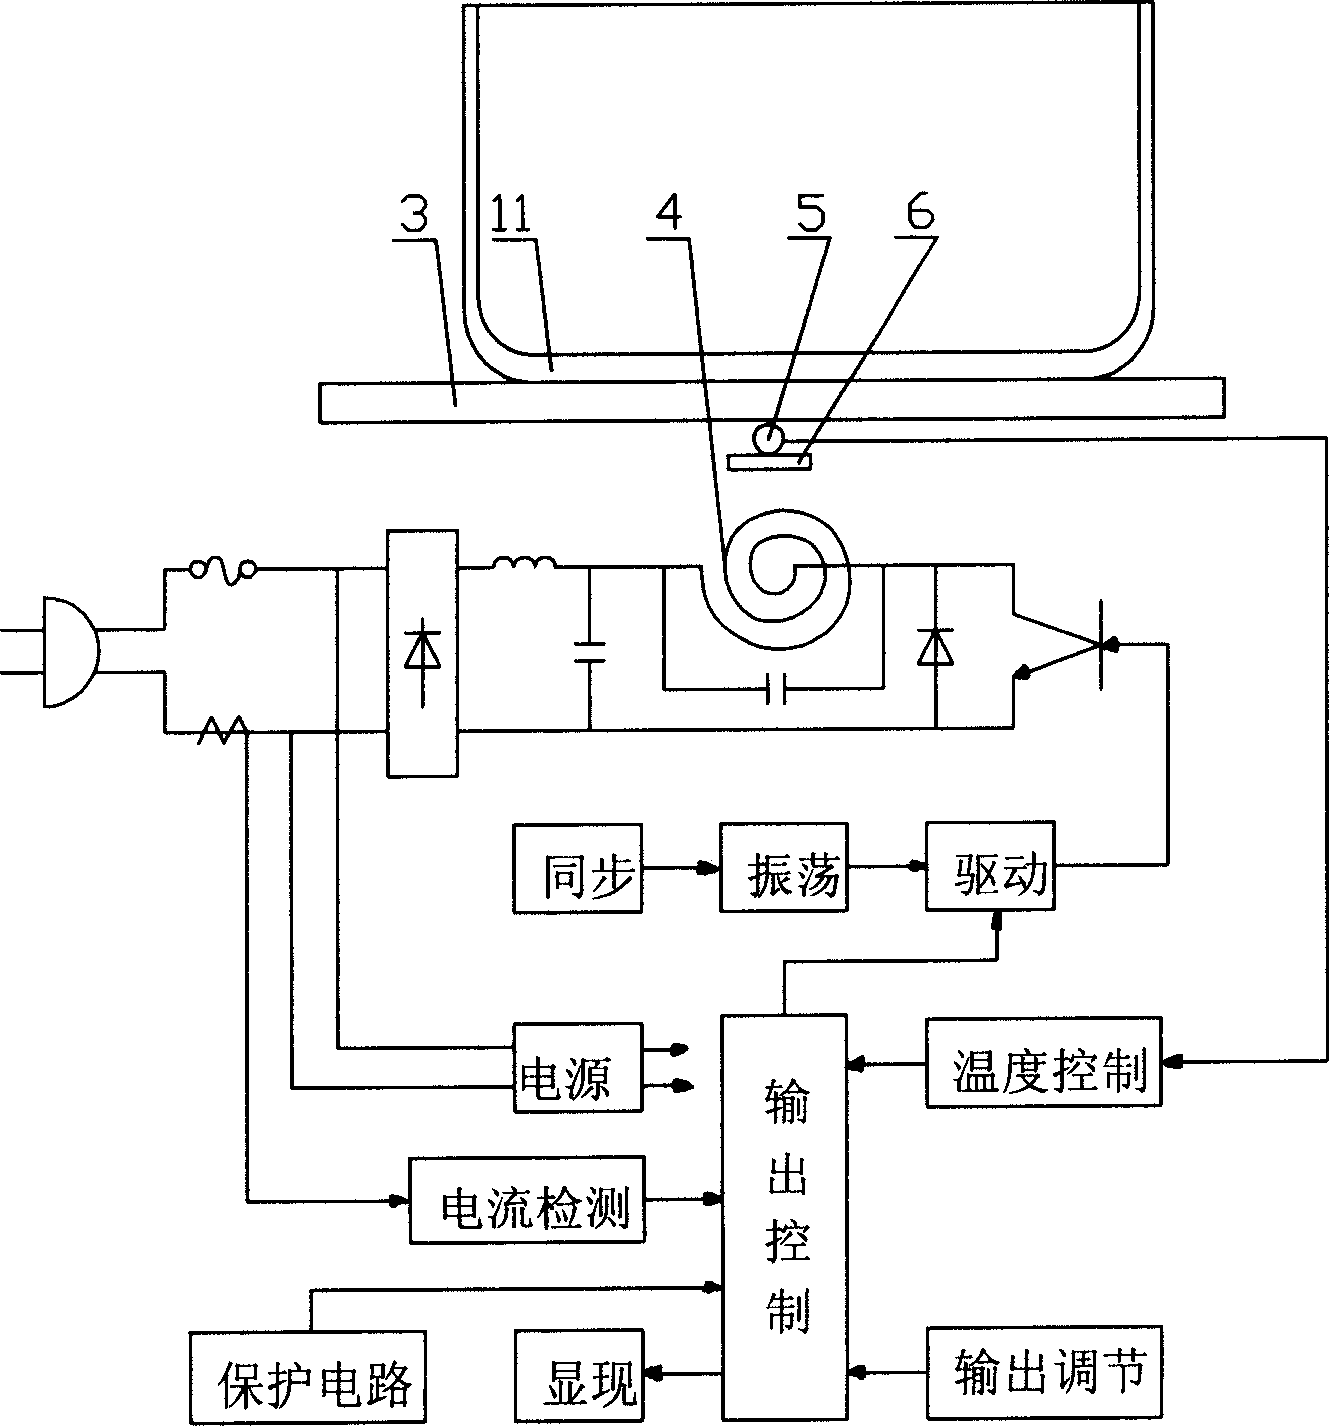 Electromagnetic range capable of automatic control temperature